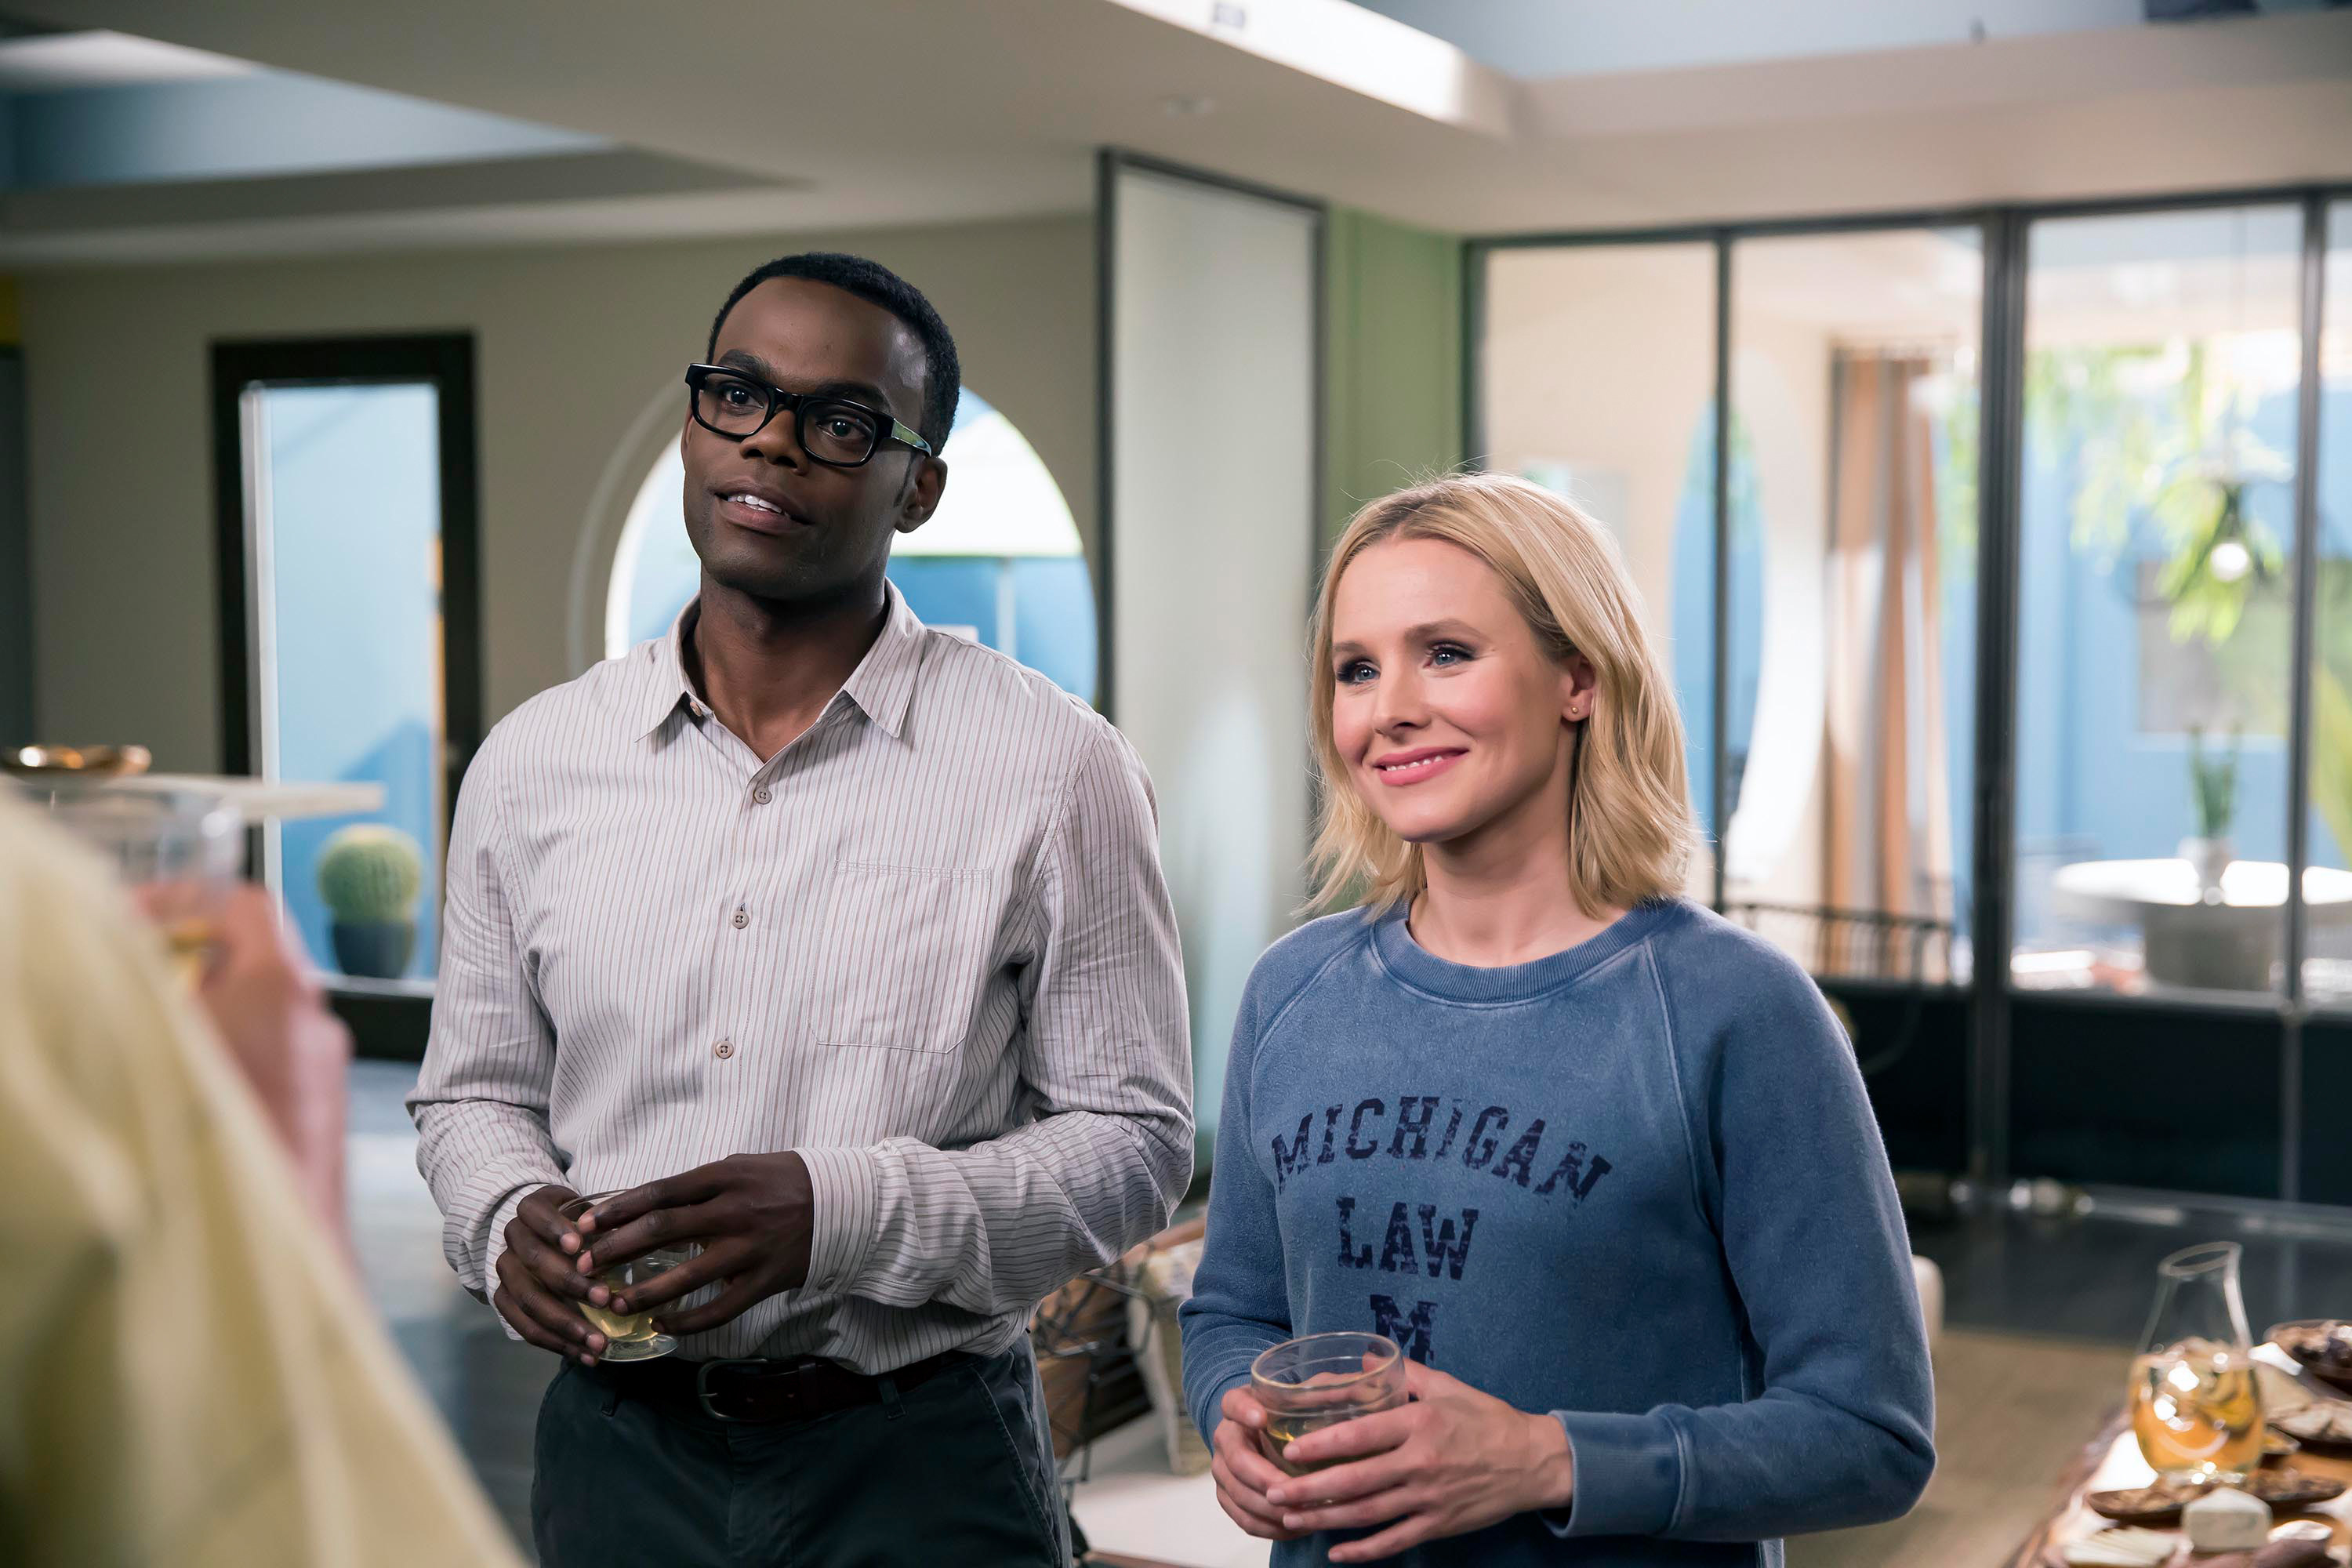 Chidi and Eleanor standing side by side